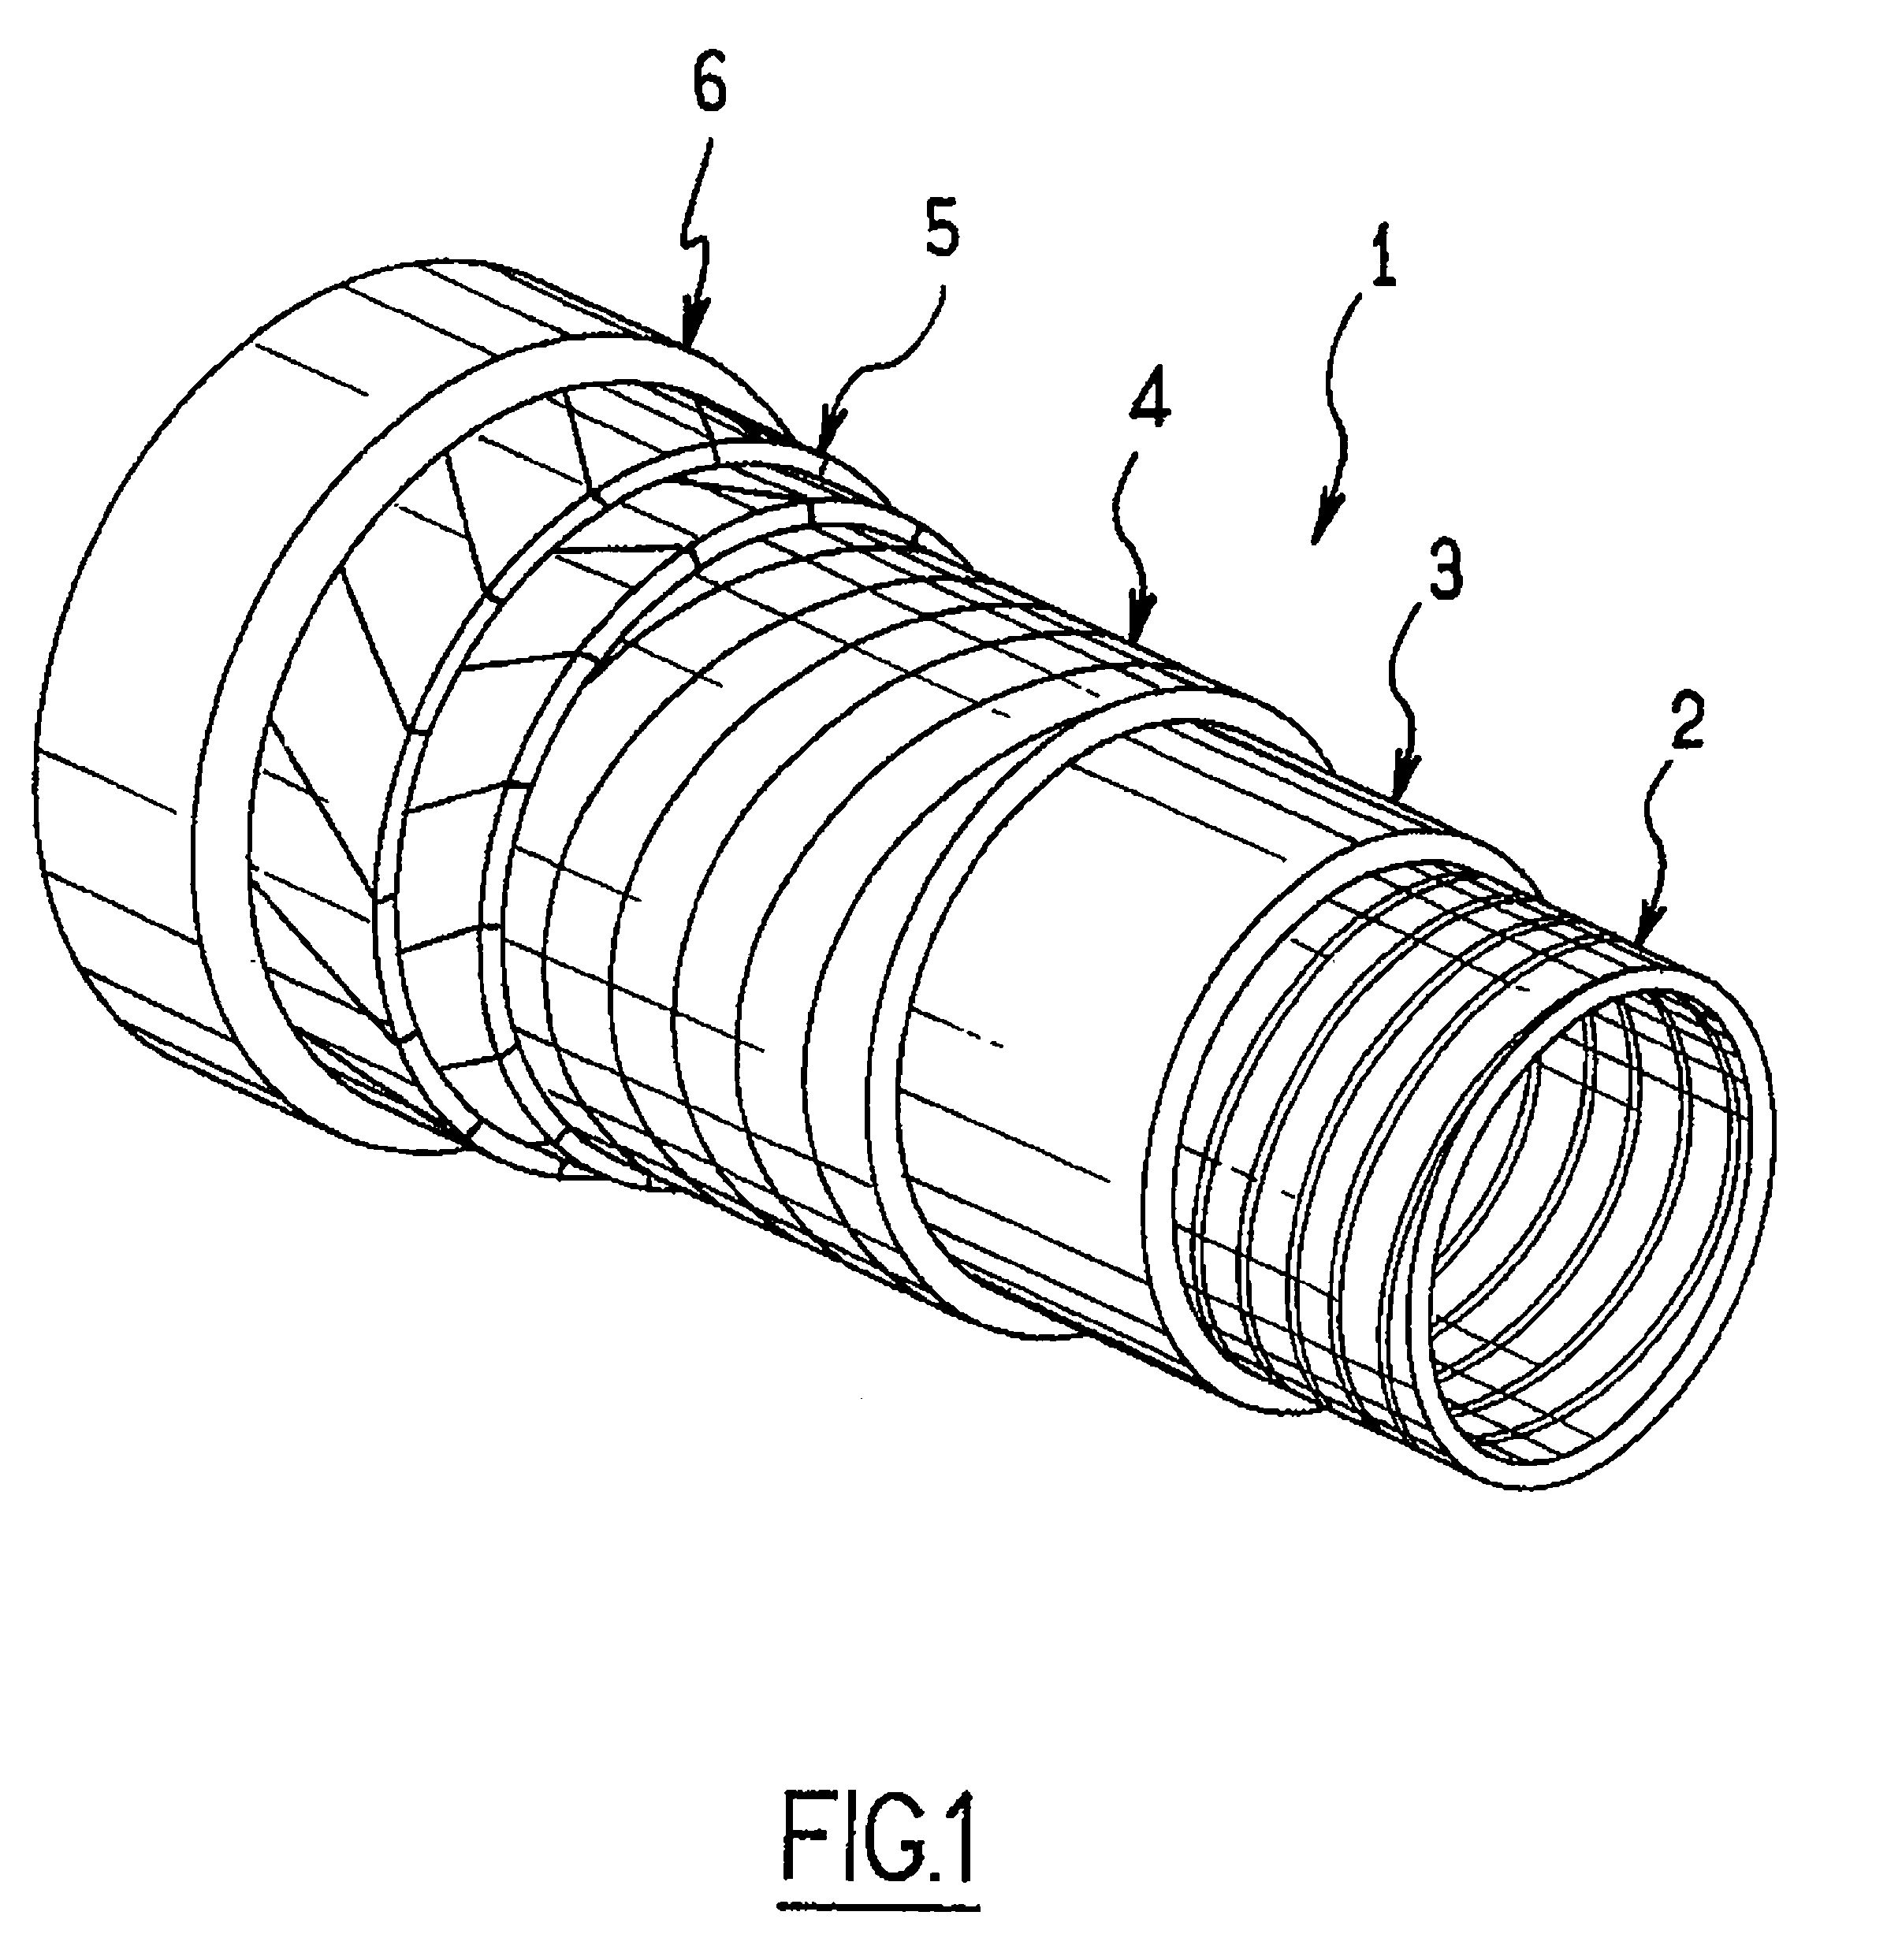 Flexible pipe for transporting hydrocarbons, which includes a tubular pipe carcass made of interlocked metal strip